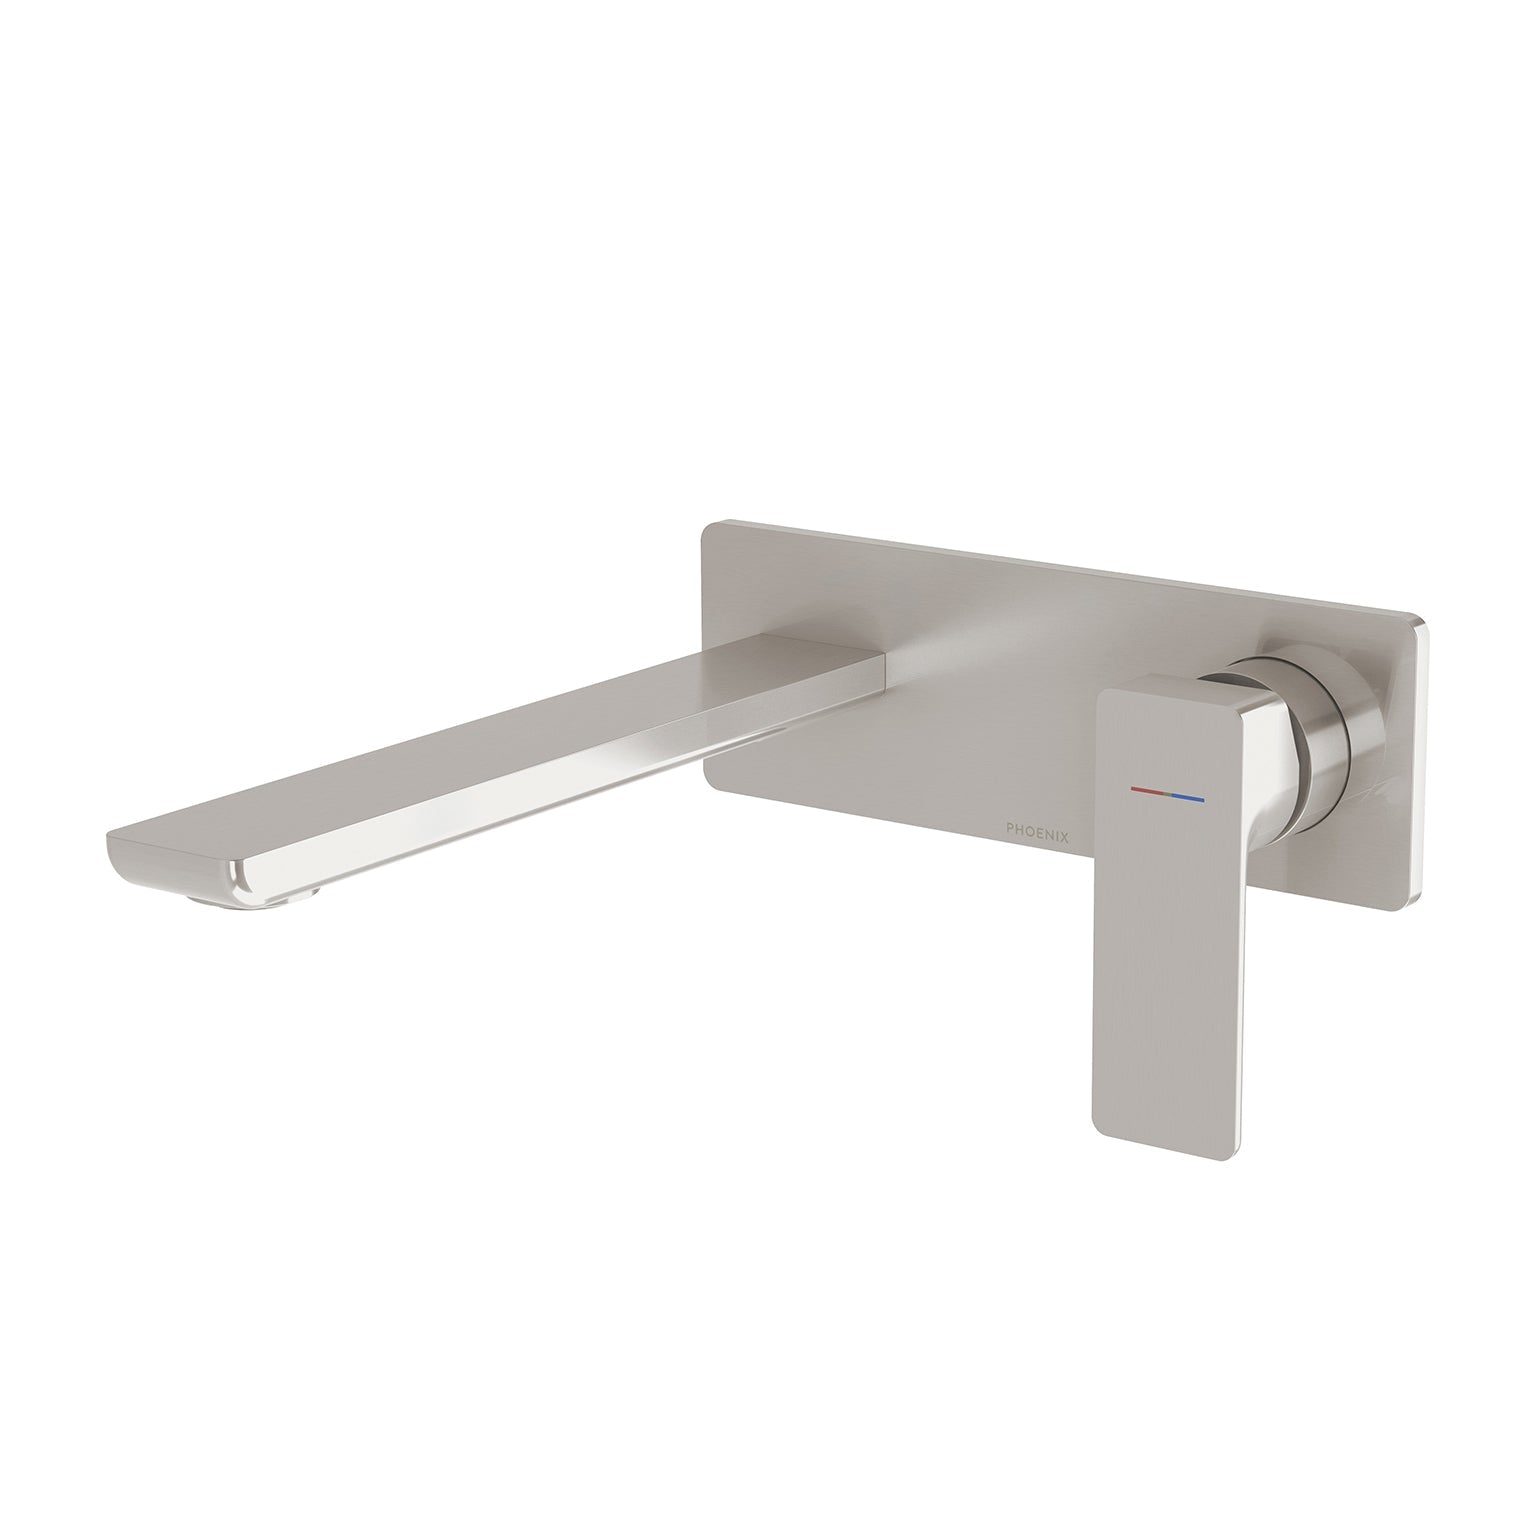 PHOENIX GLOSS MKII SWITCHMIX WALL BASIN / BATH MIXER SET FIT-OFF AND ROUGH-IN KIT BRUSHED NICKEL